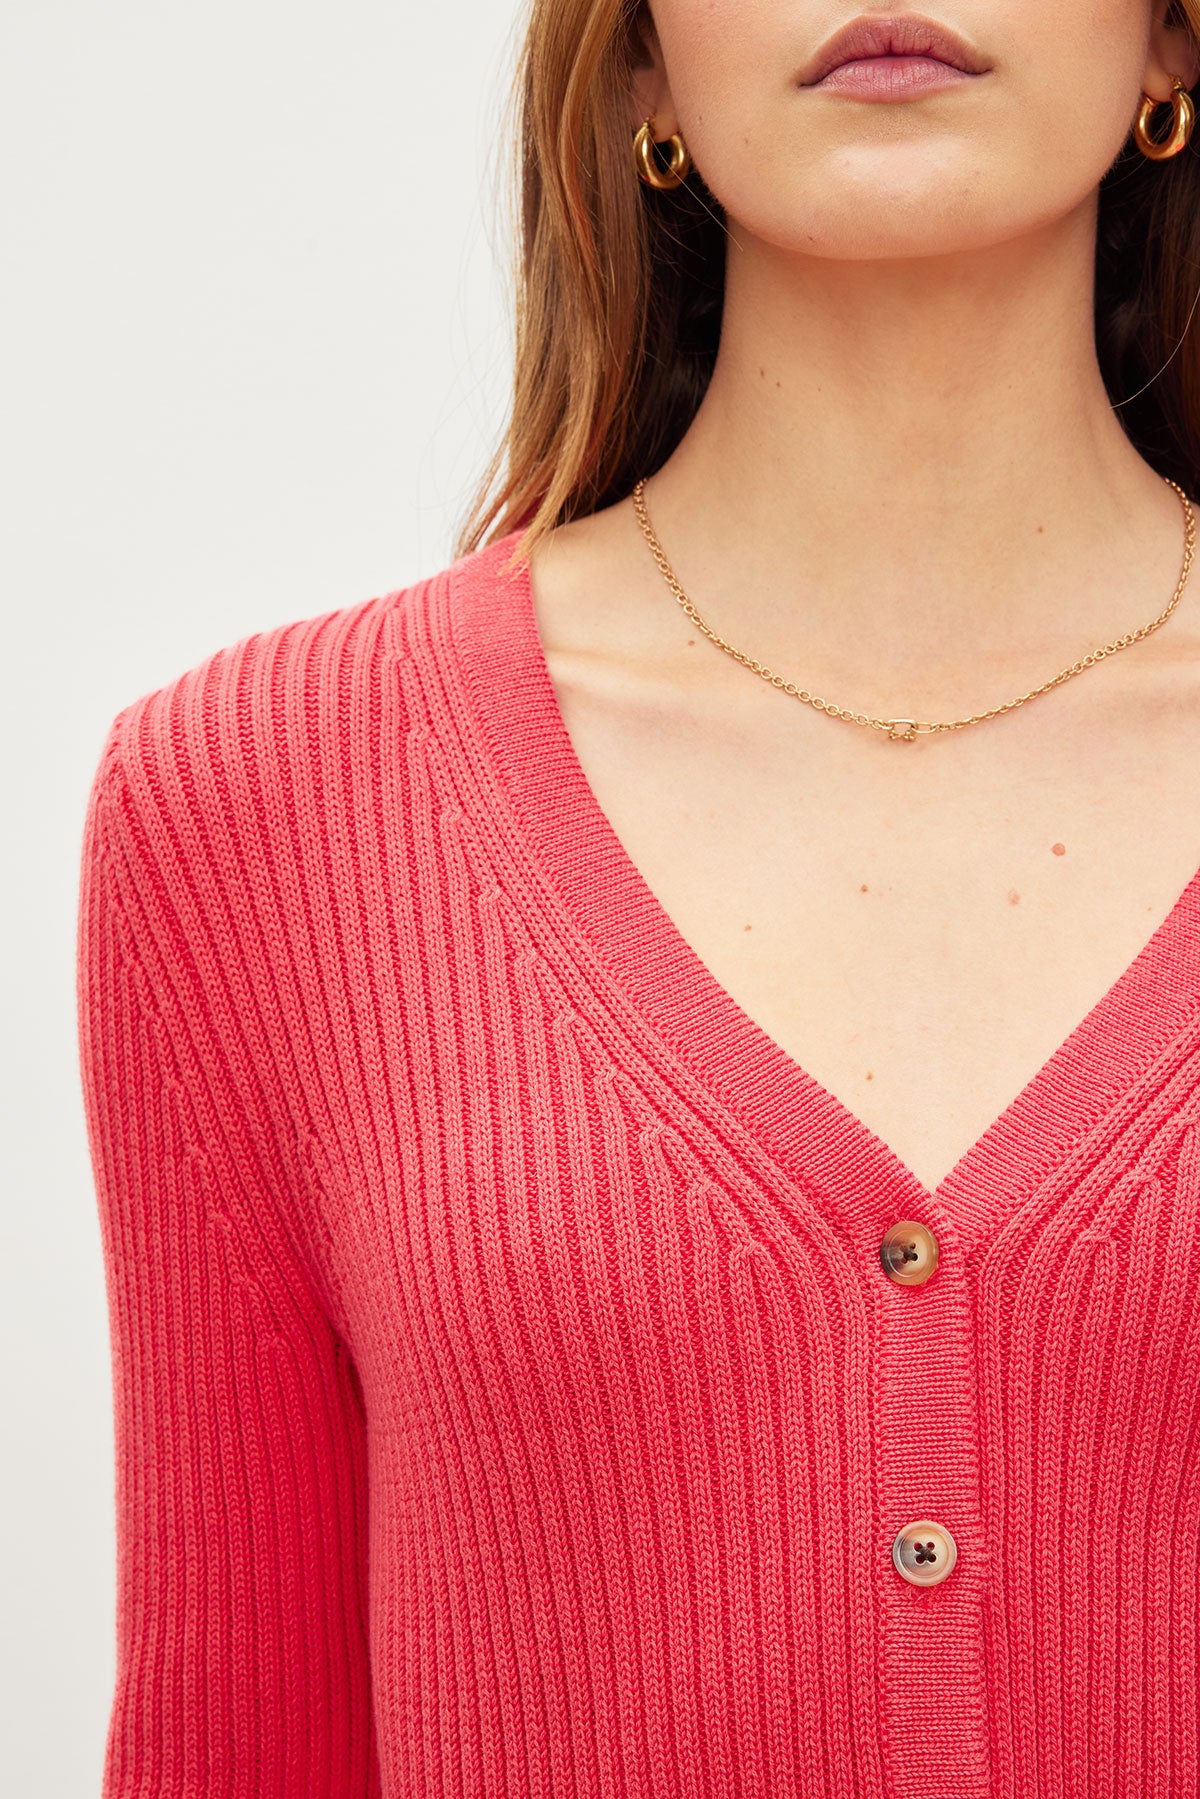   Close-up of a woman wearing a Velvet by Graham & Spencer HYDIE BUTTON FRONT CARDIGAN in coral cotton ribbed knit with buttons, a subtle necklace, and hoop earrings. 